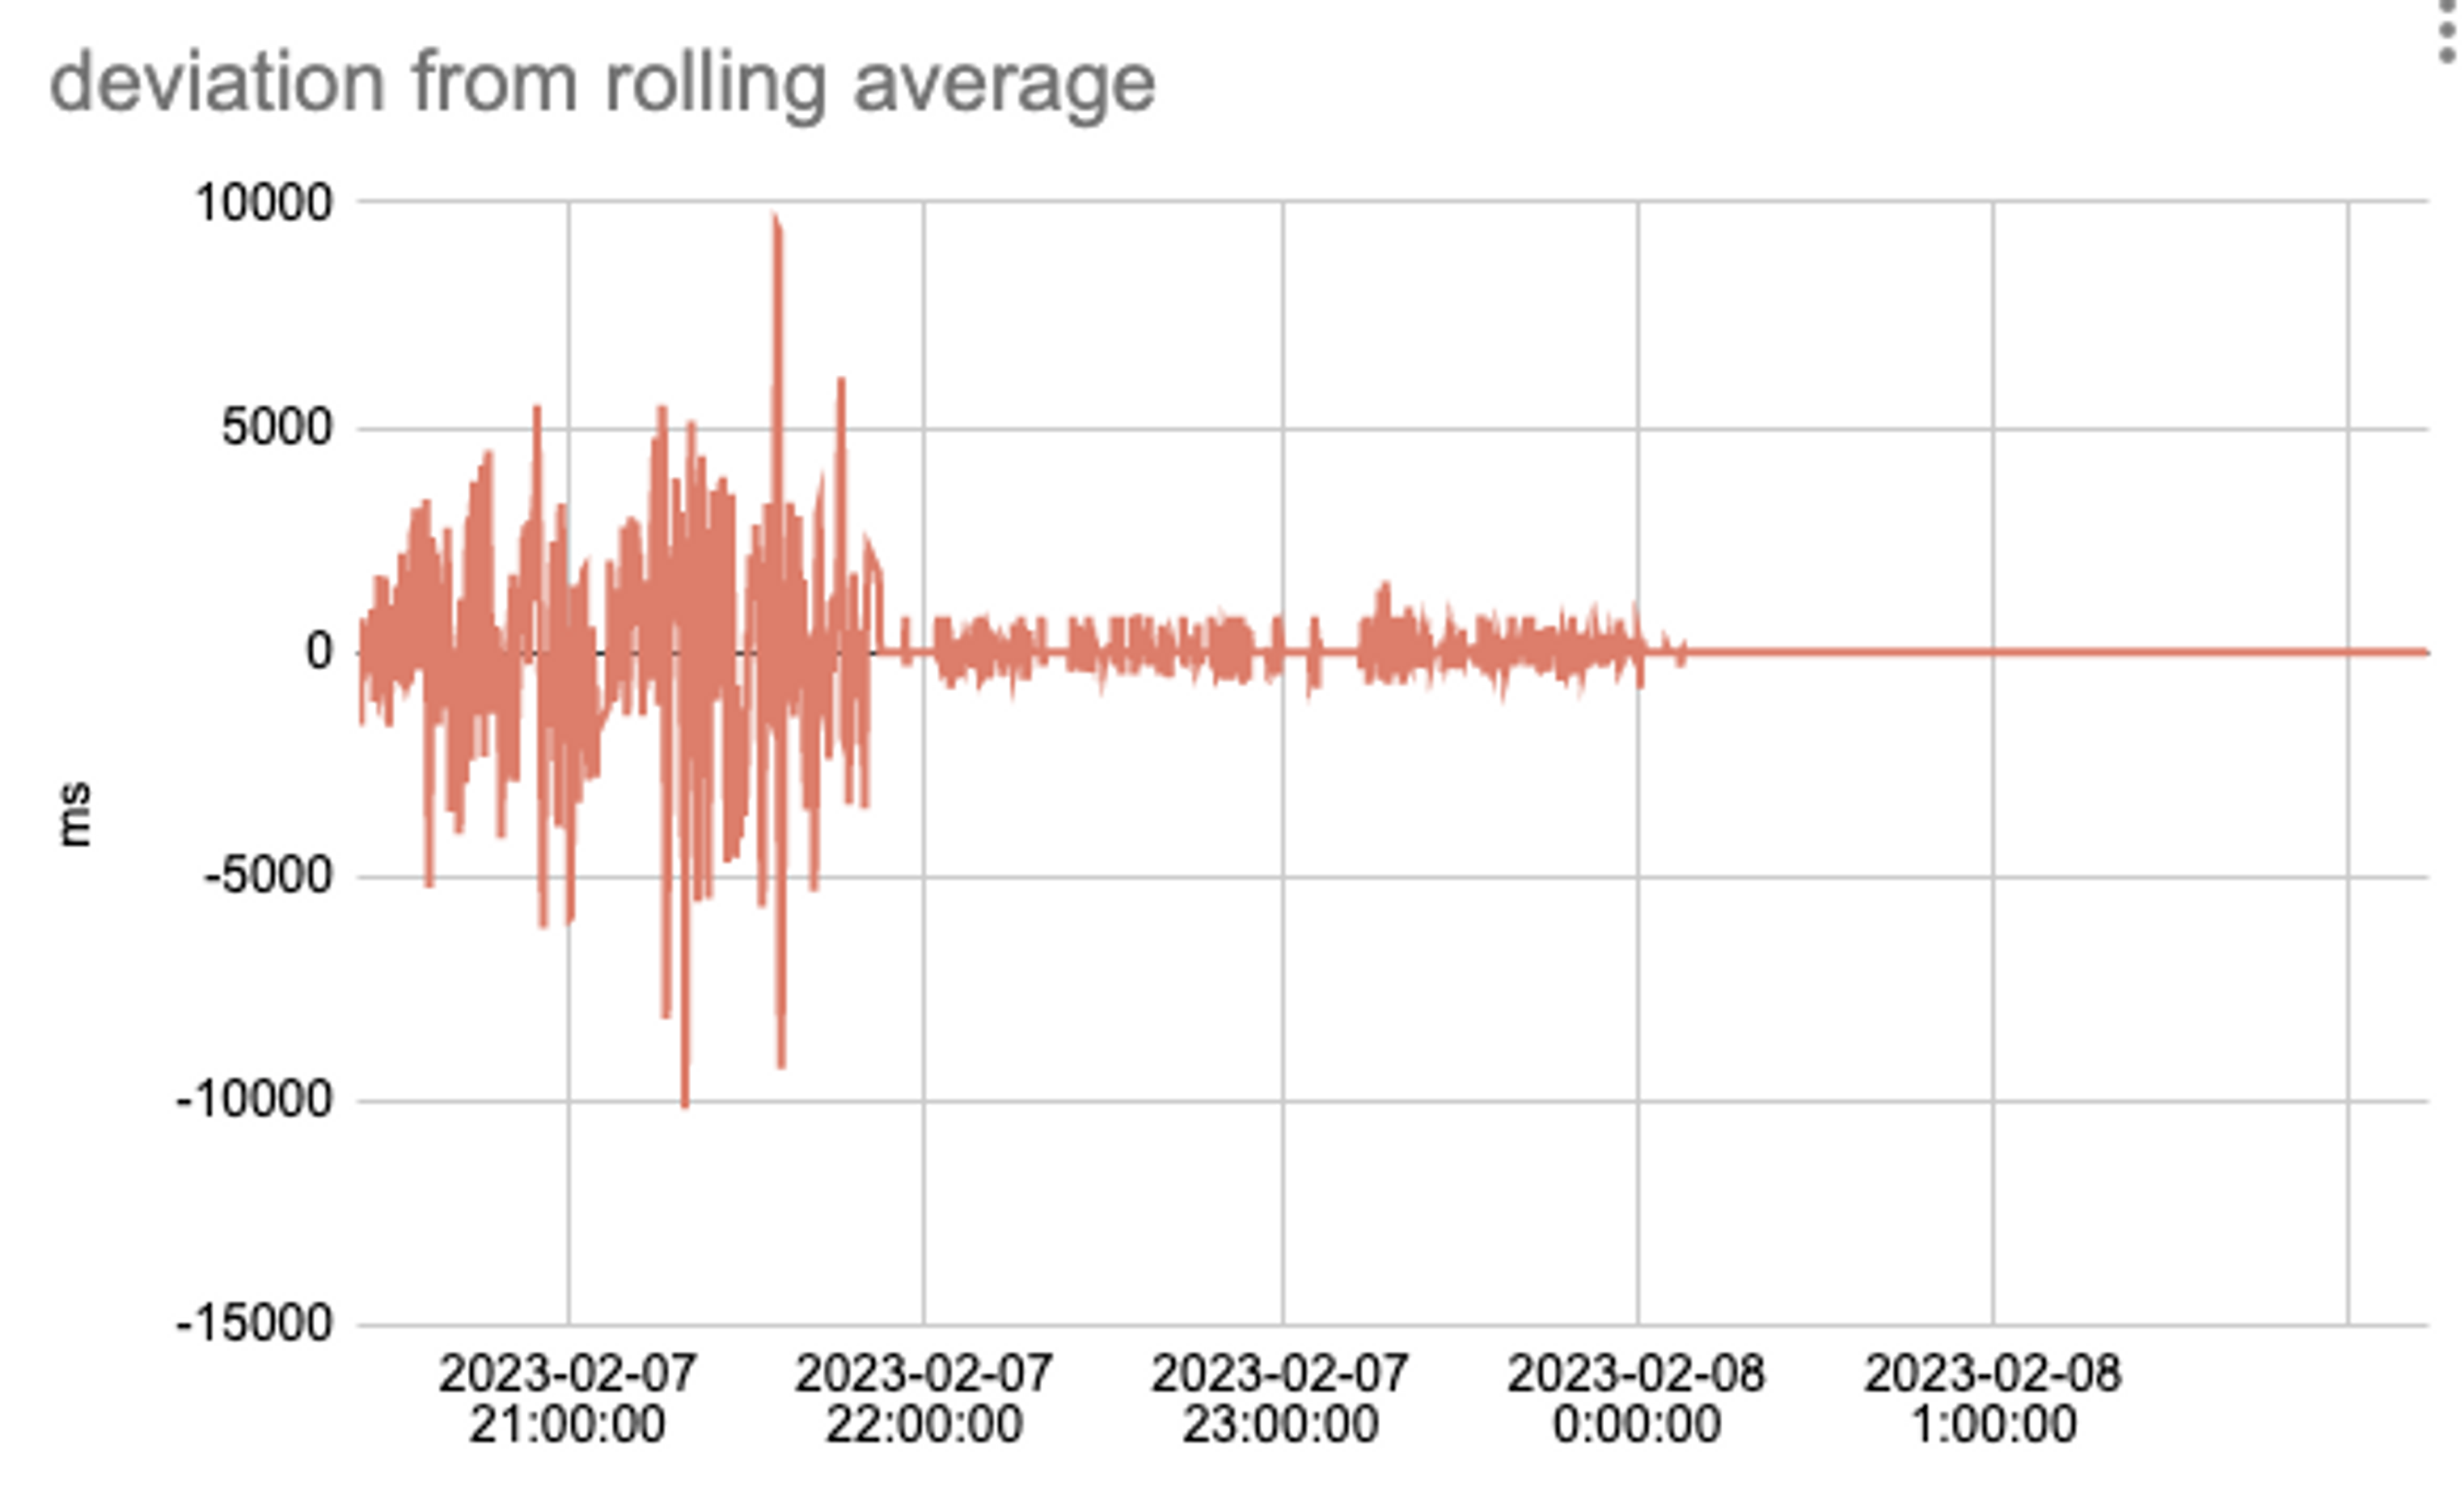 A chart depicting stream drift deviation from rolling average over time